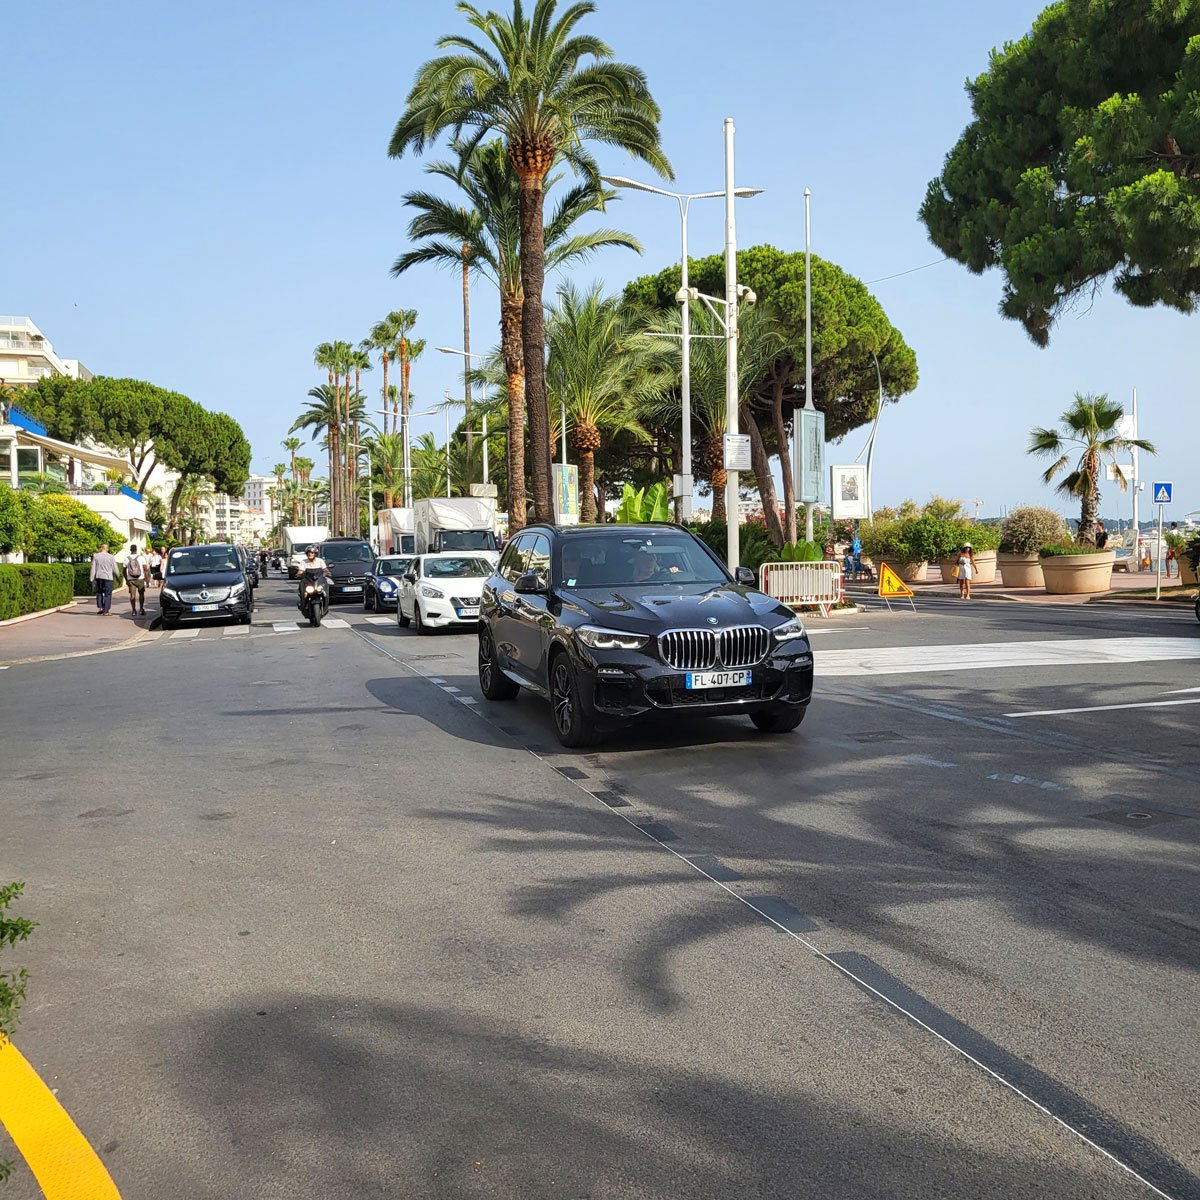 Promenade-Croisette-Street-Cannes-Lions-2022-Creative-by-Collective-20220620_174248.jpg